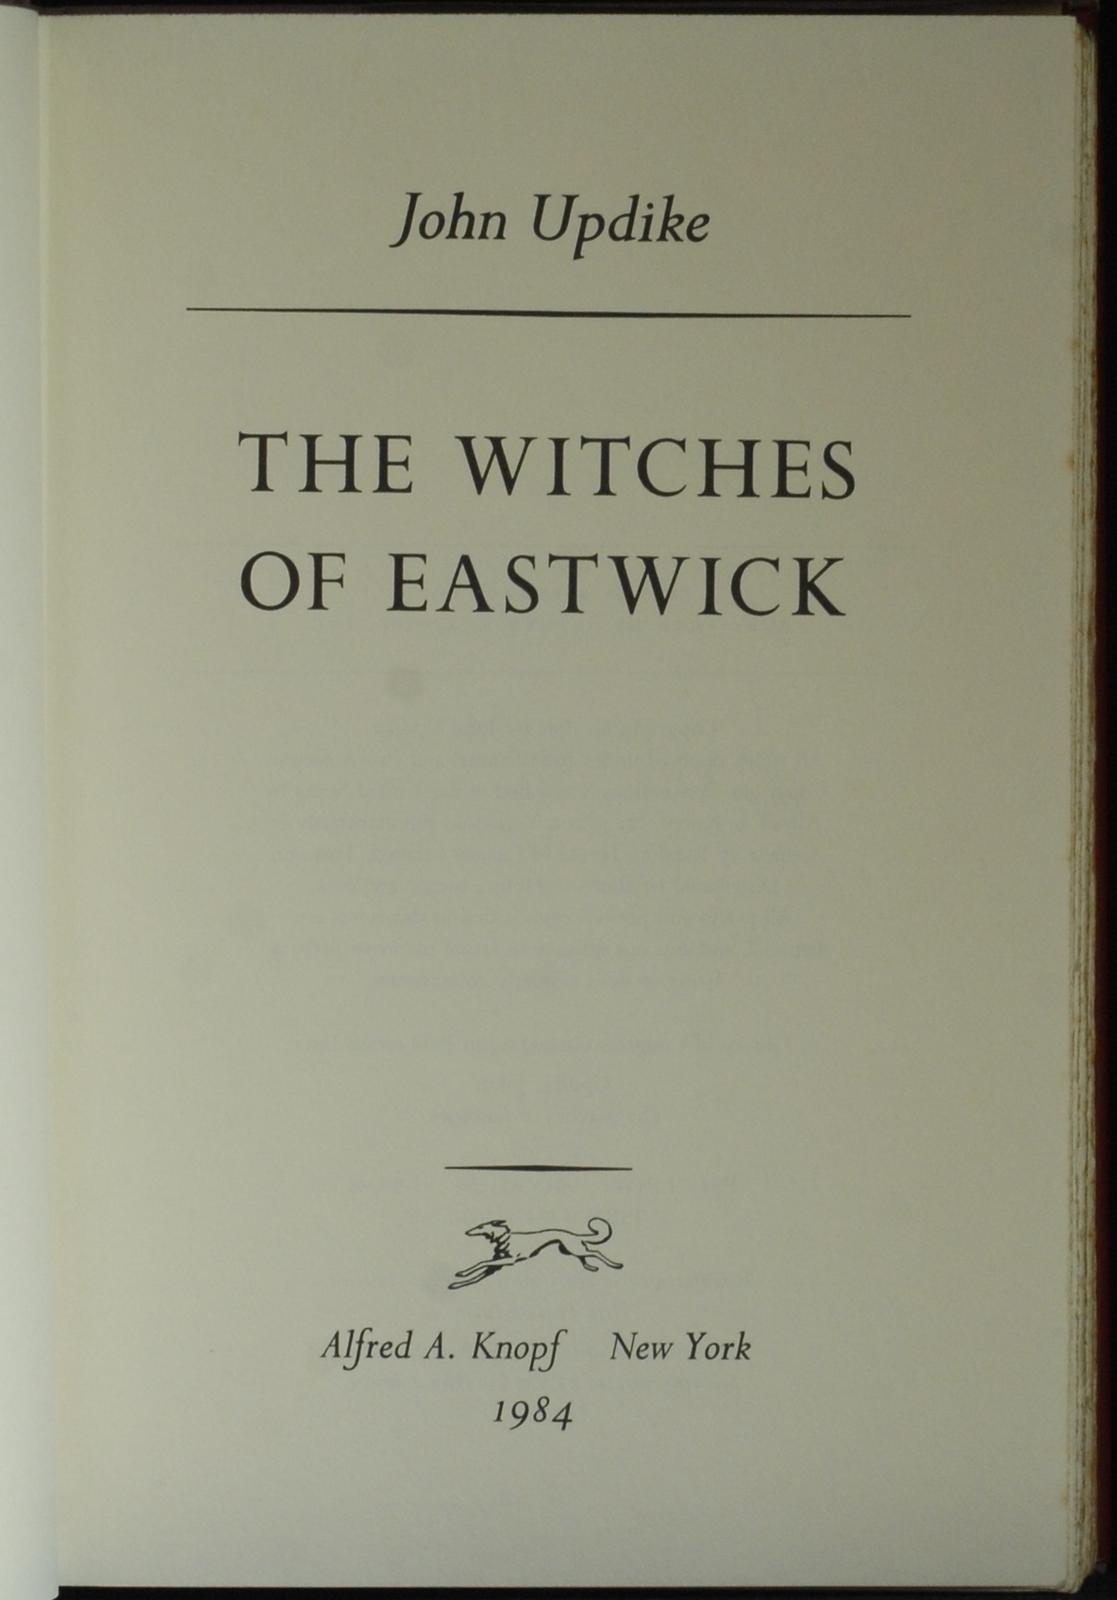 mbb006795d_-_Updike_John_-_The_Witches_Of_Eastwick.jpg